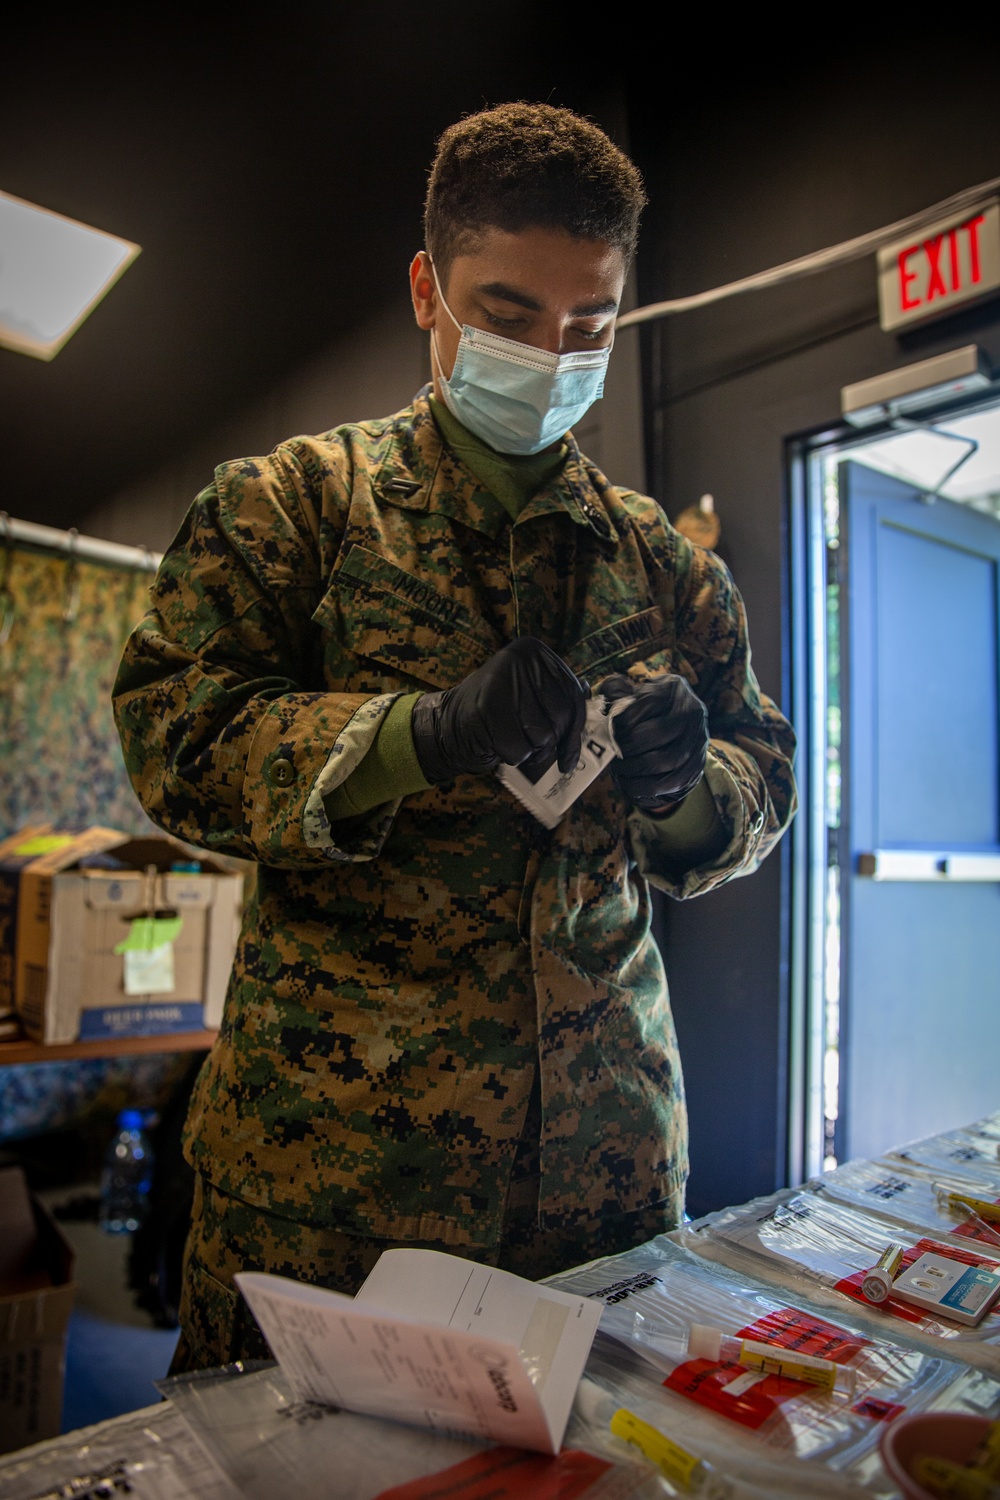 U.S. Navy Corpsmen Organize Patient Labs on Task Force Quantico